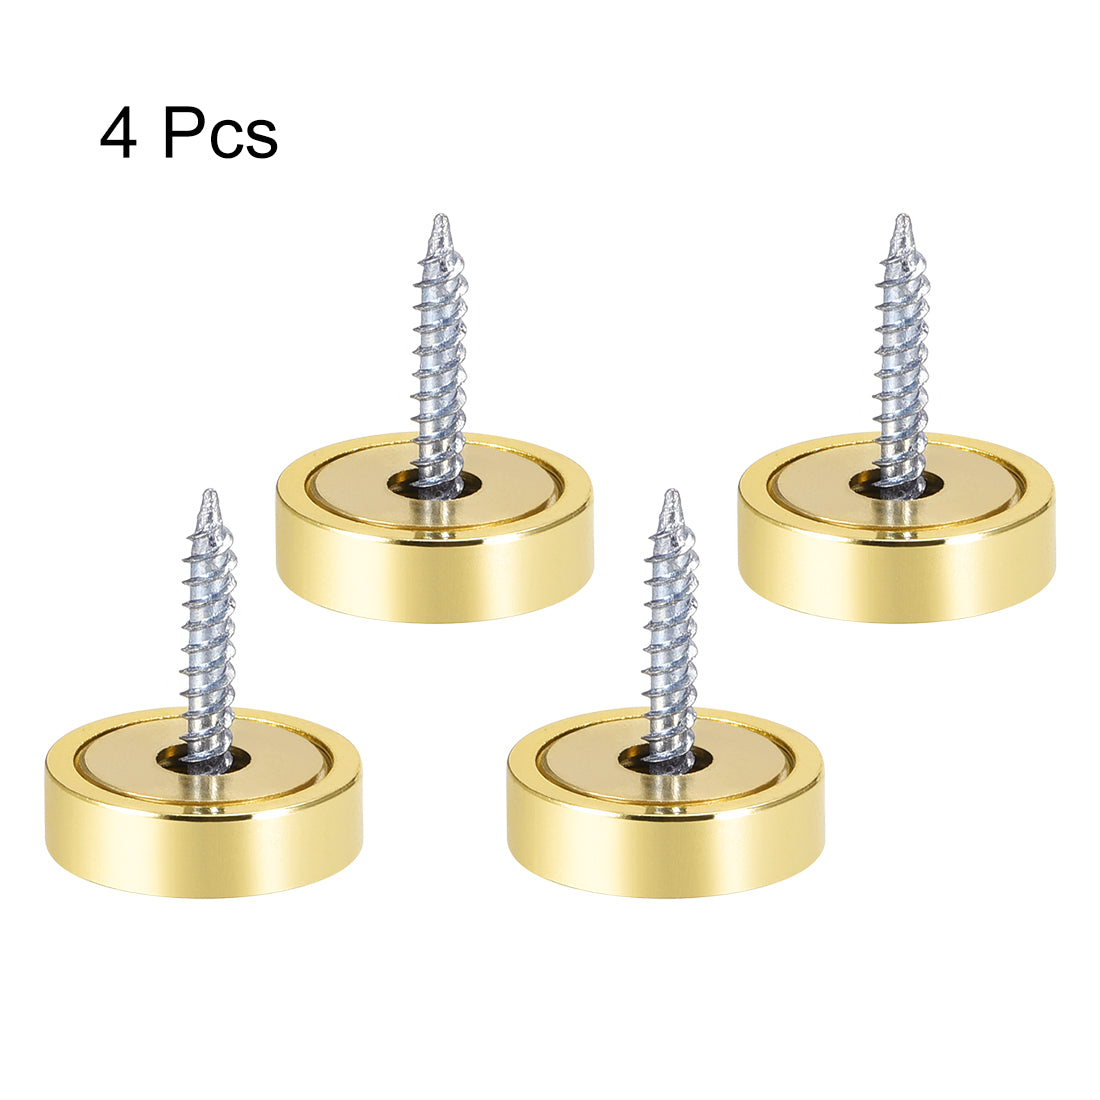 uxcell Uxcell Mirror Screws Decorative Cap Cover Polished 4pcs